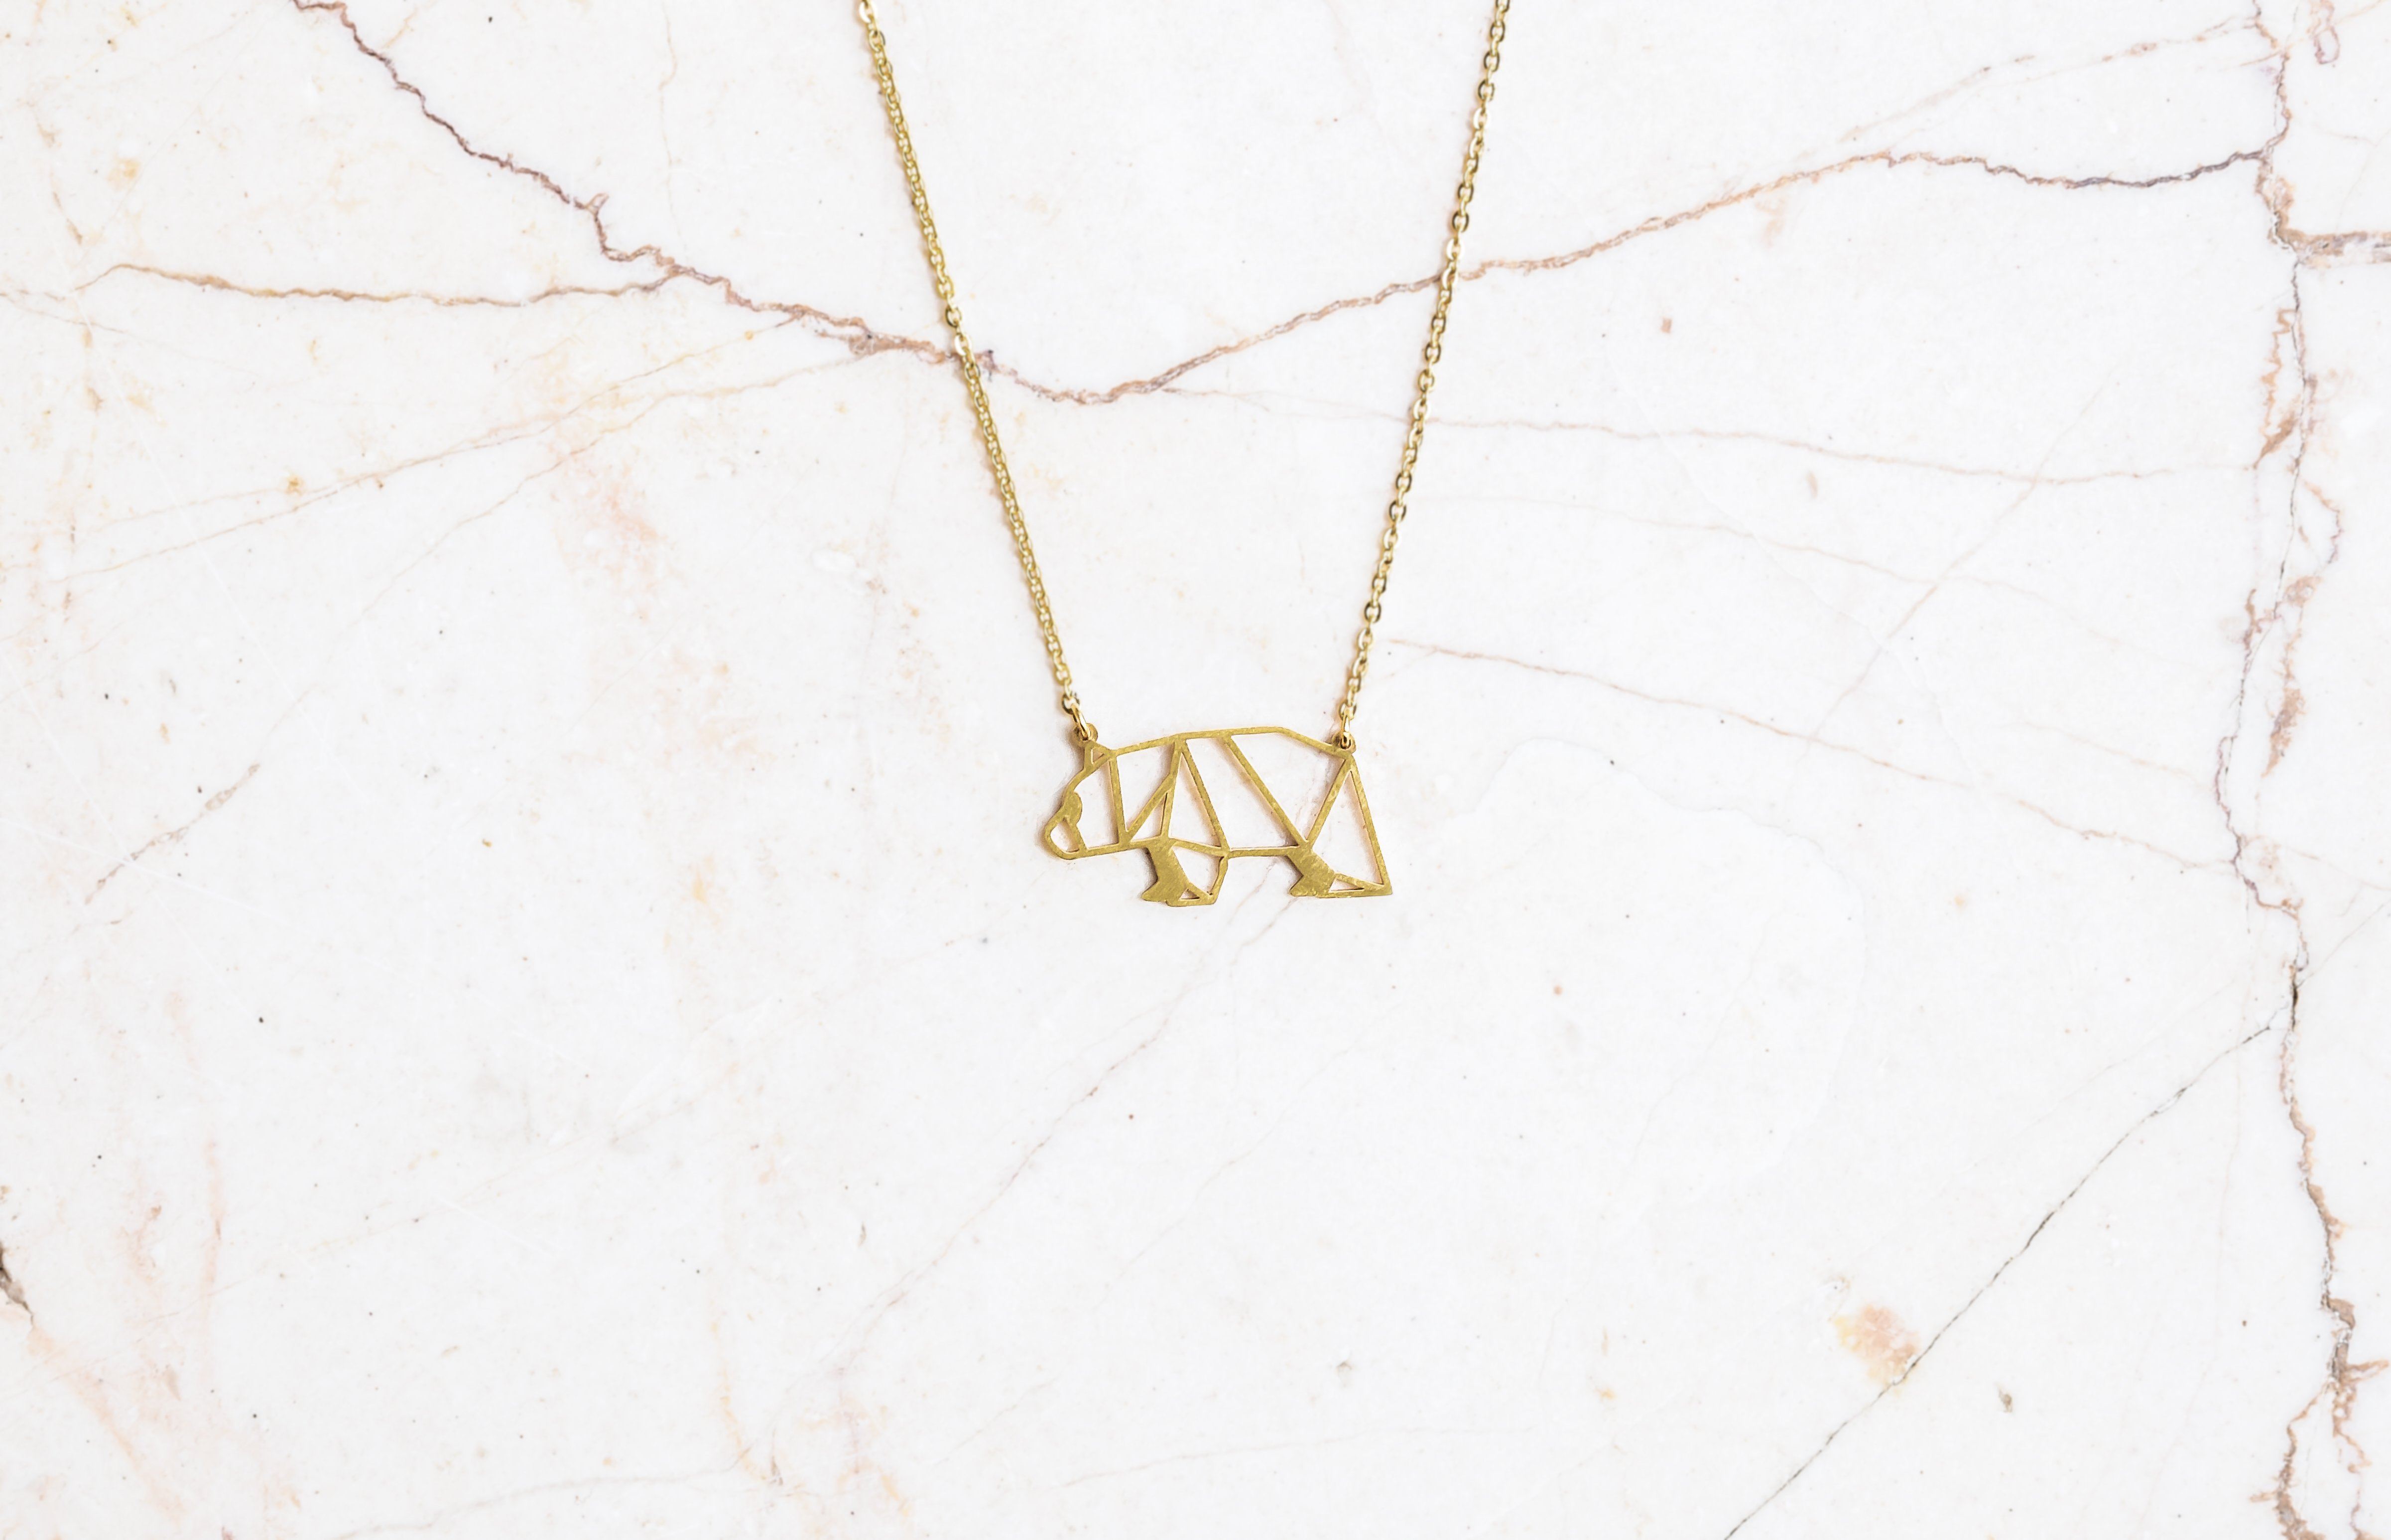 Bear Gold Origami Geometric Necklace